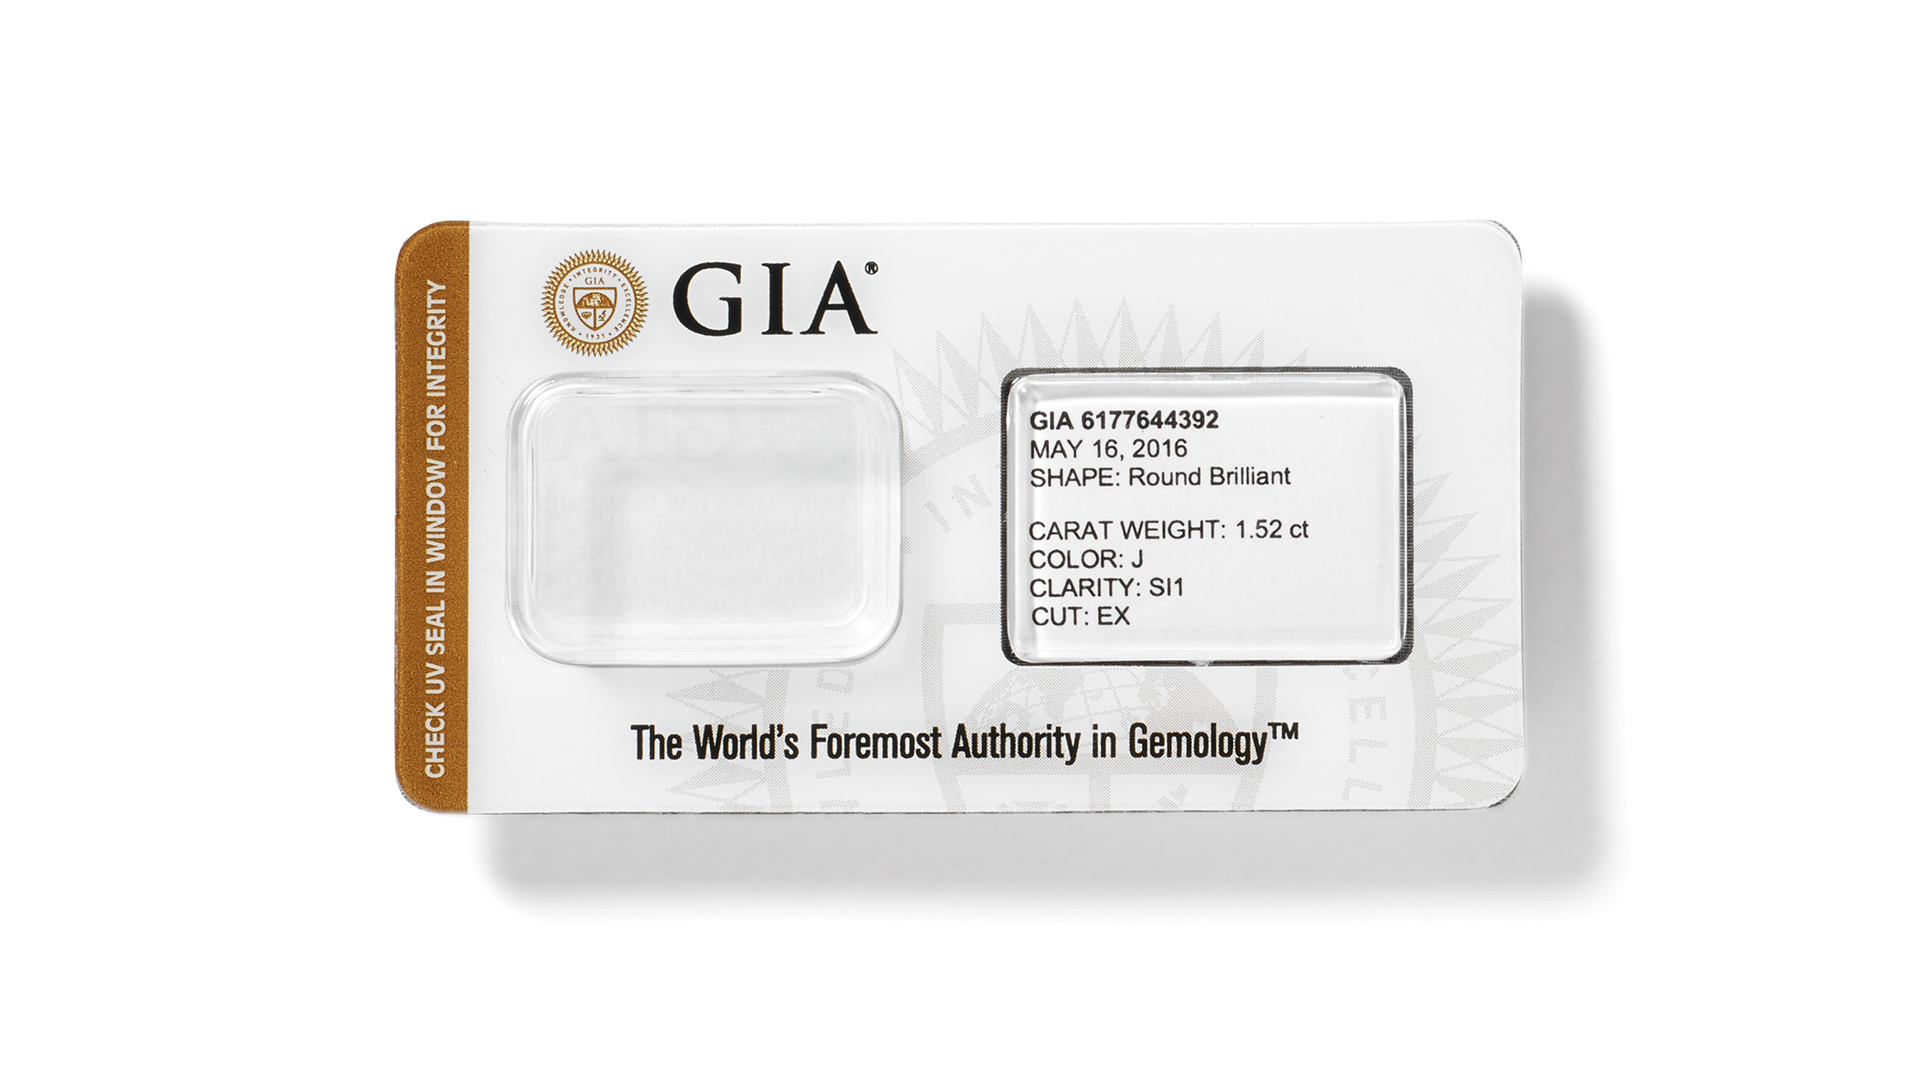 Sample of GIA sealing service's secure, tamper-resistant packaging with diamond's key grading details listed on the front.